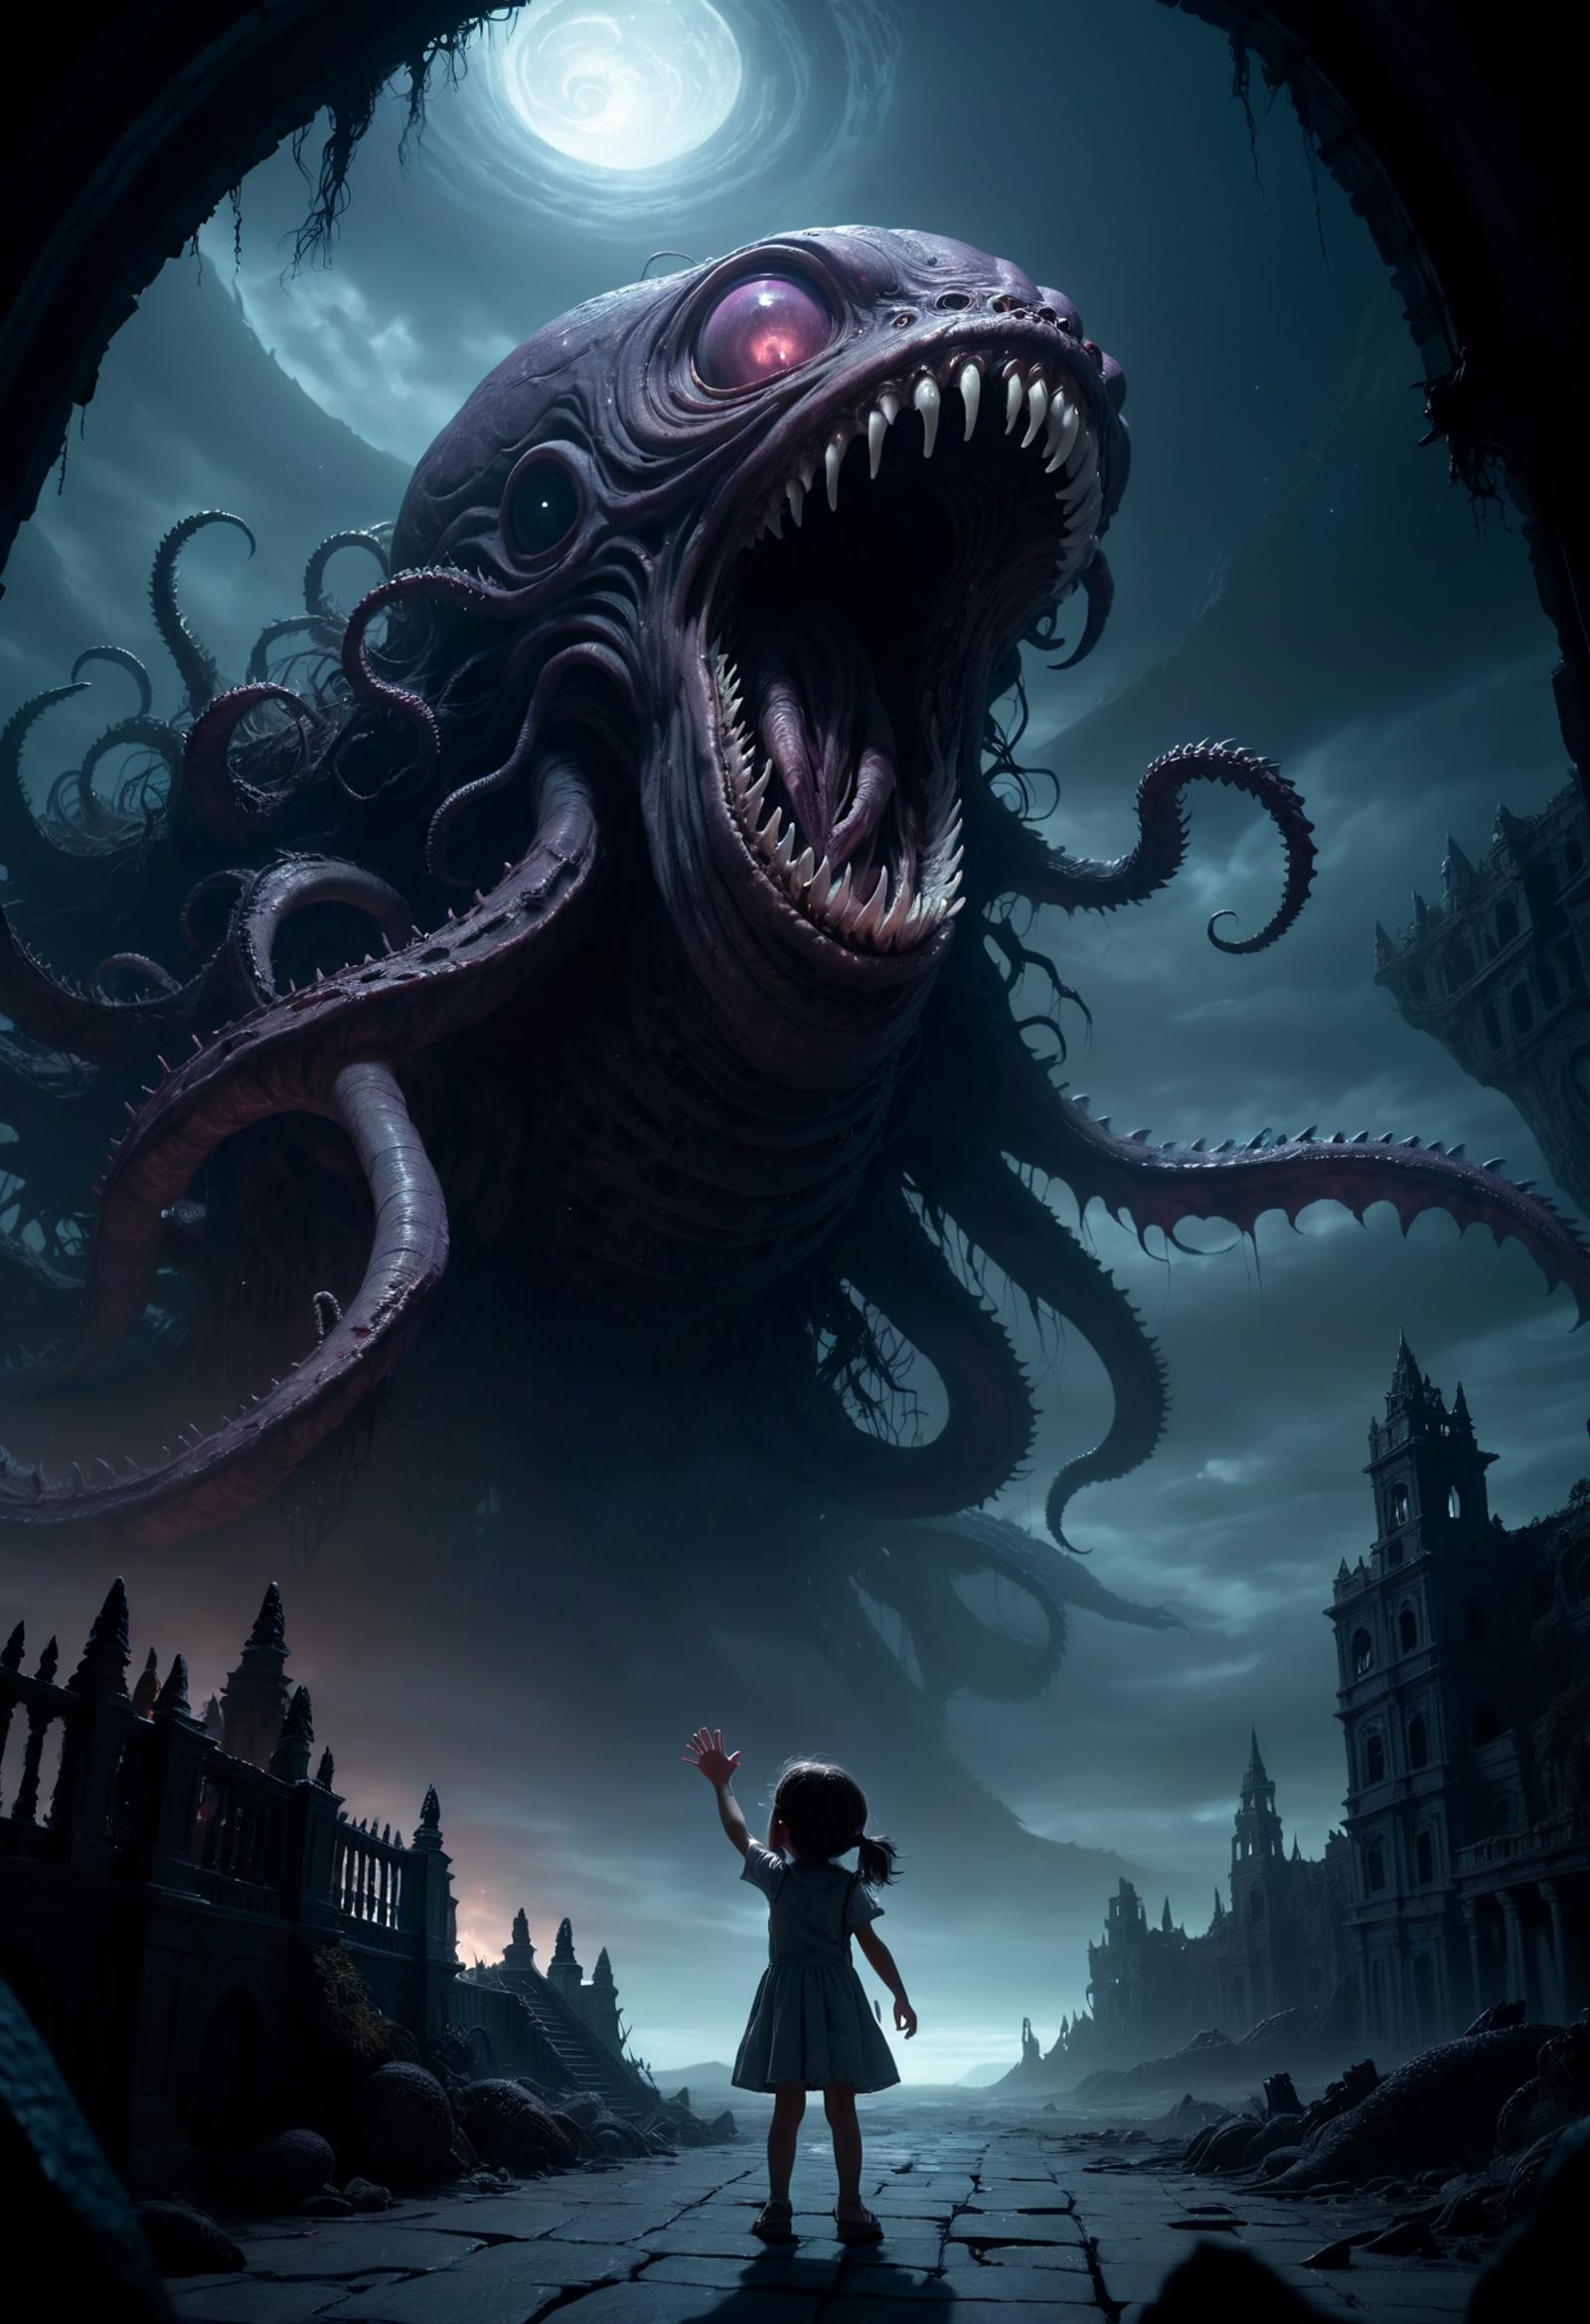 A person standing in front of a giant monster with tentacles.